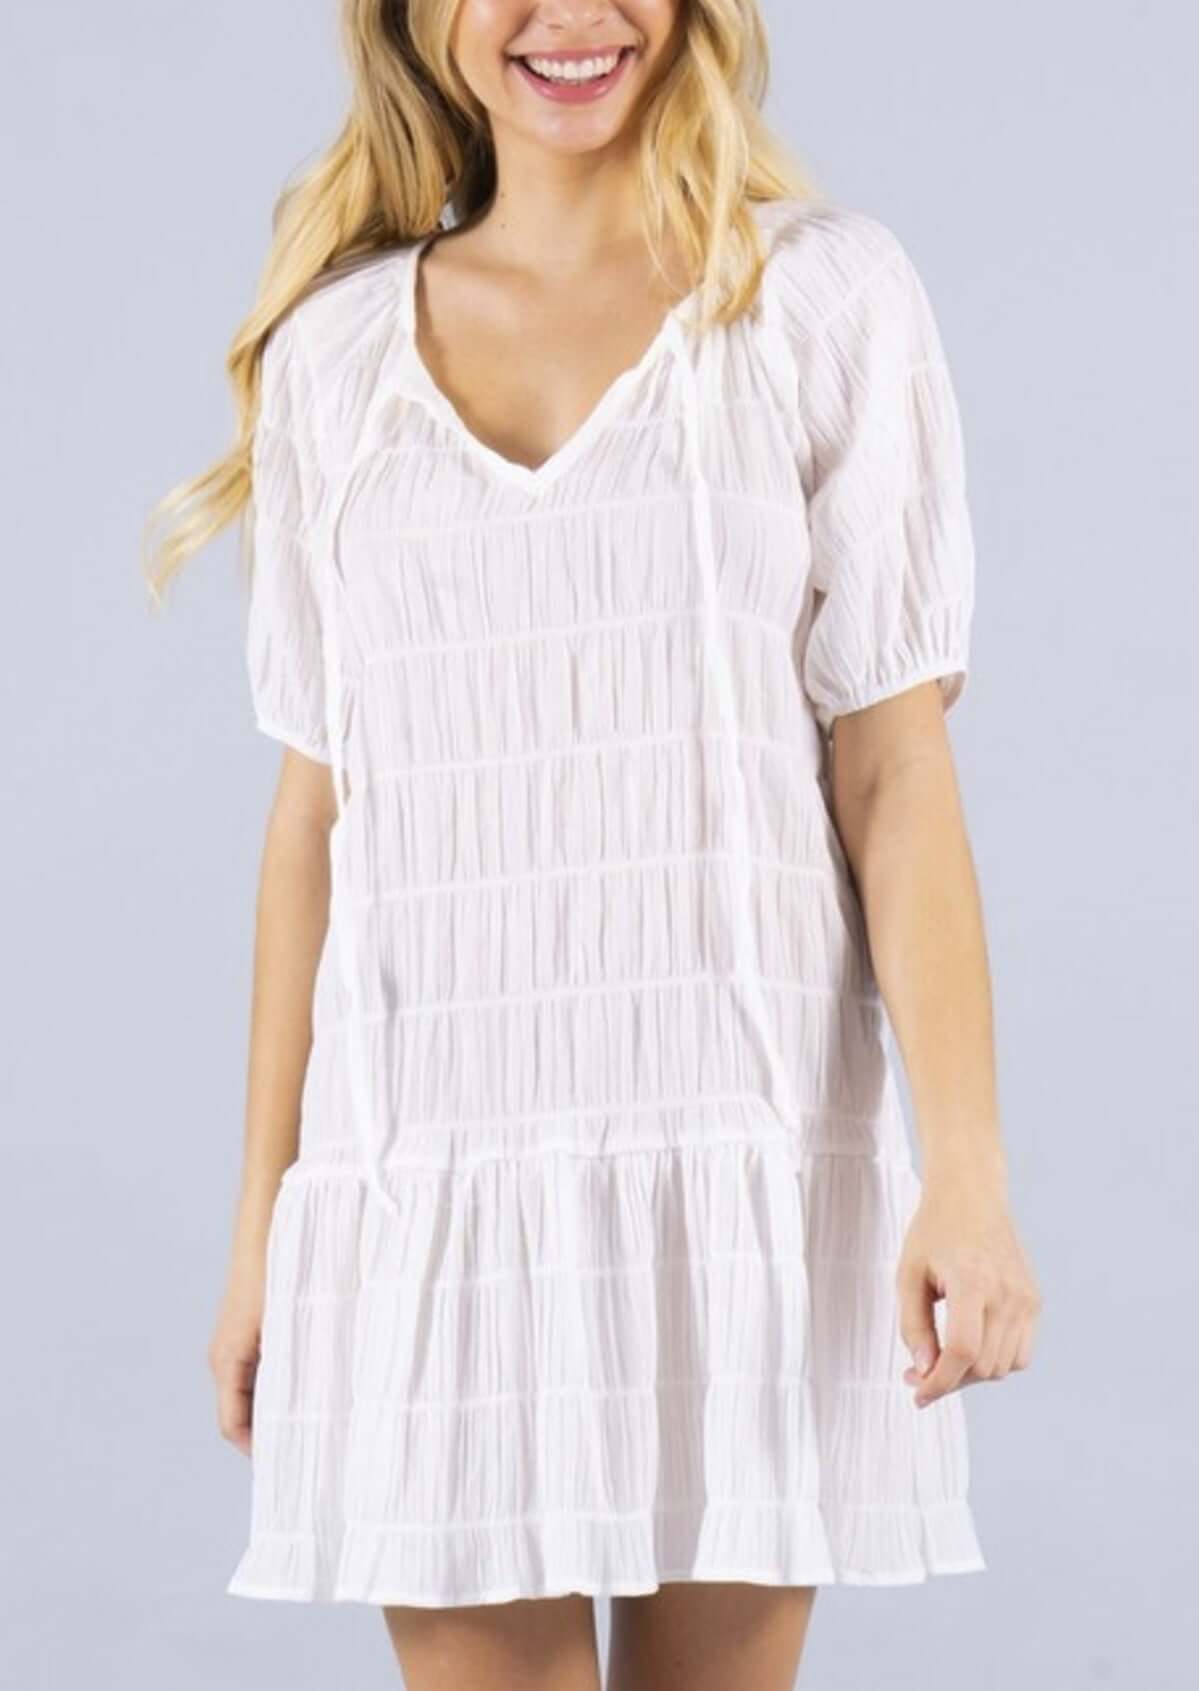 Renee C White Cotton Gauze Crinkled Beach Cover Up Tunic Dress Style 4127DR | Made in USA | Classy Cozy Cool Women's Made in America Clothing Boutique